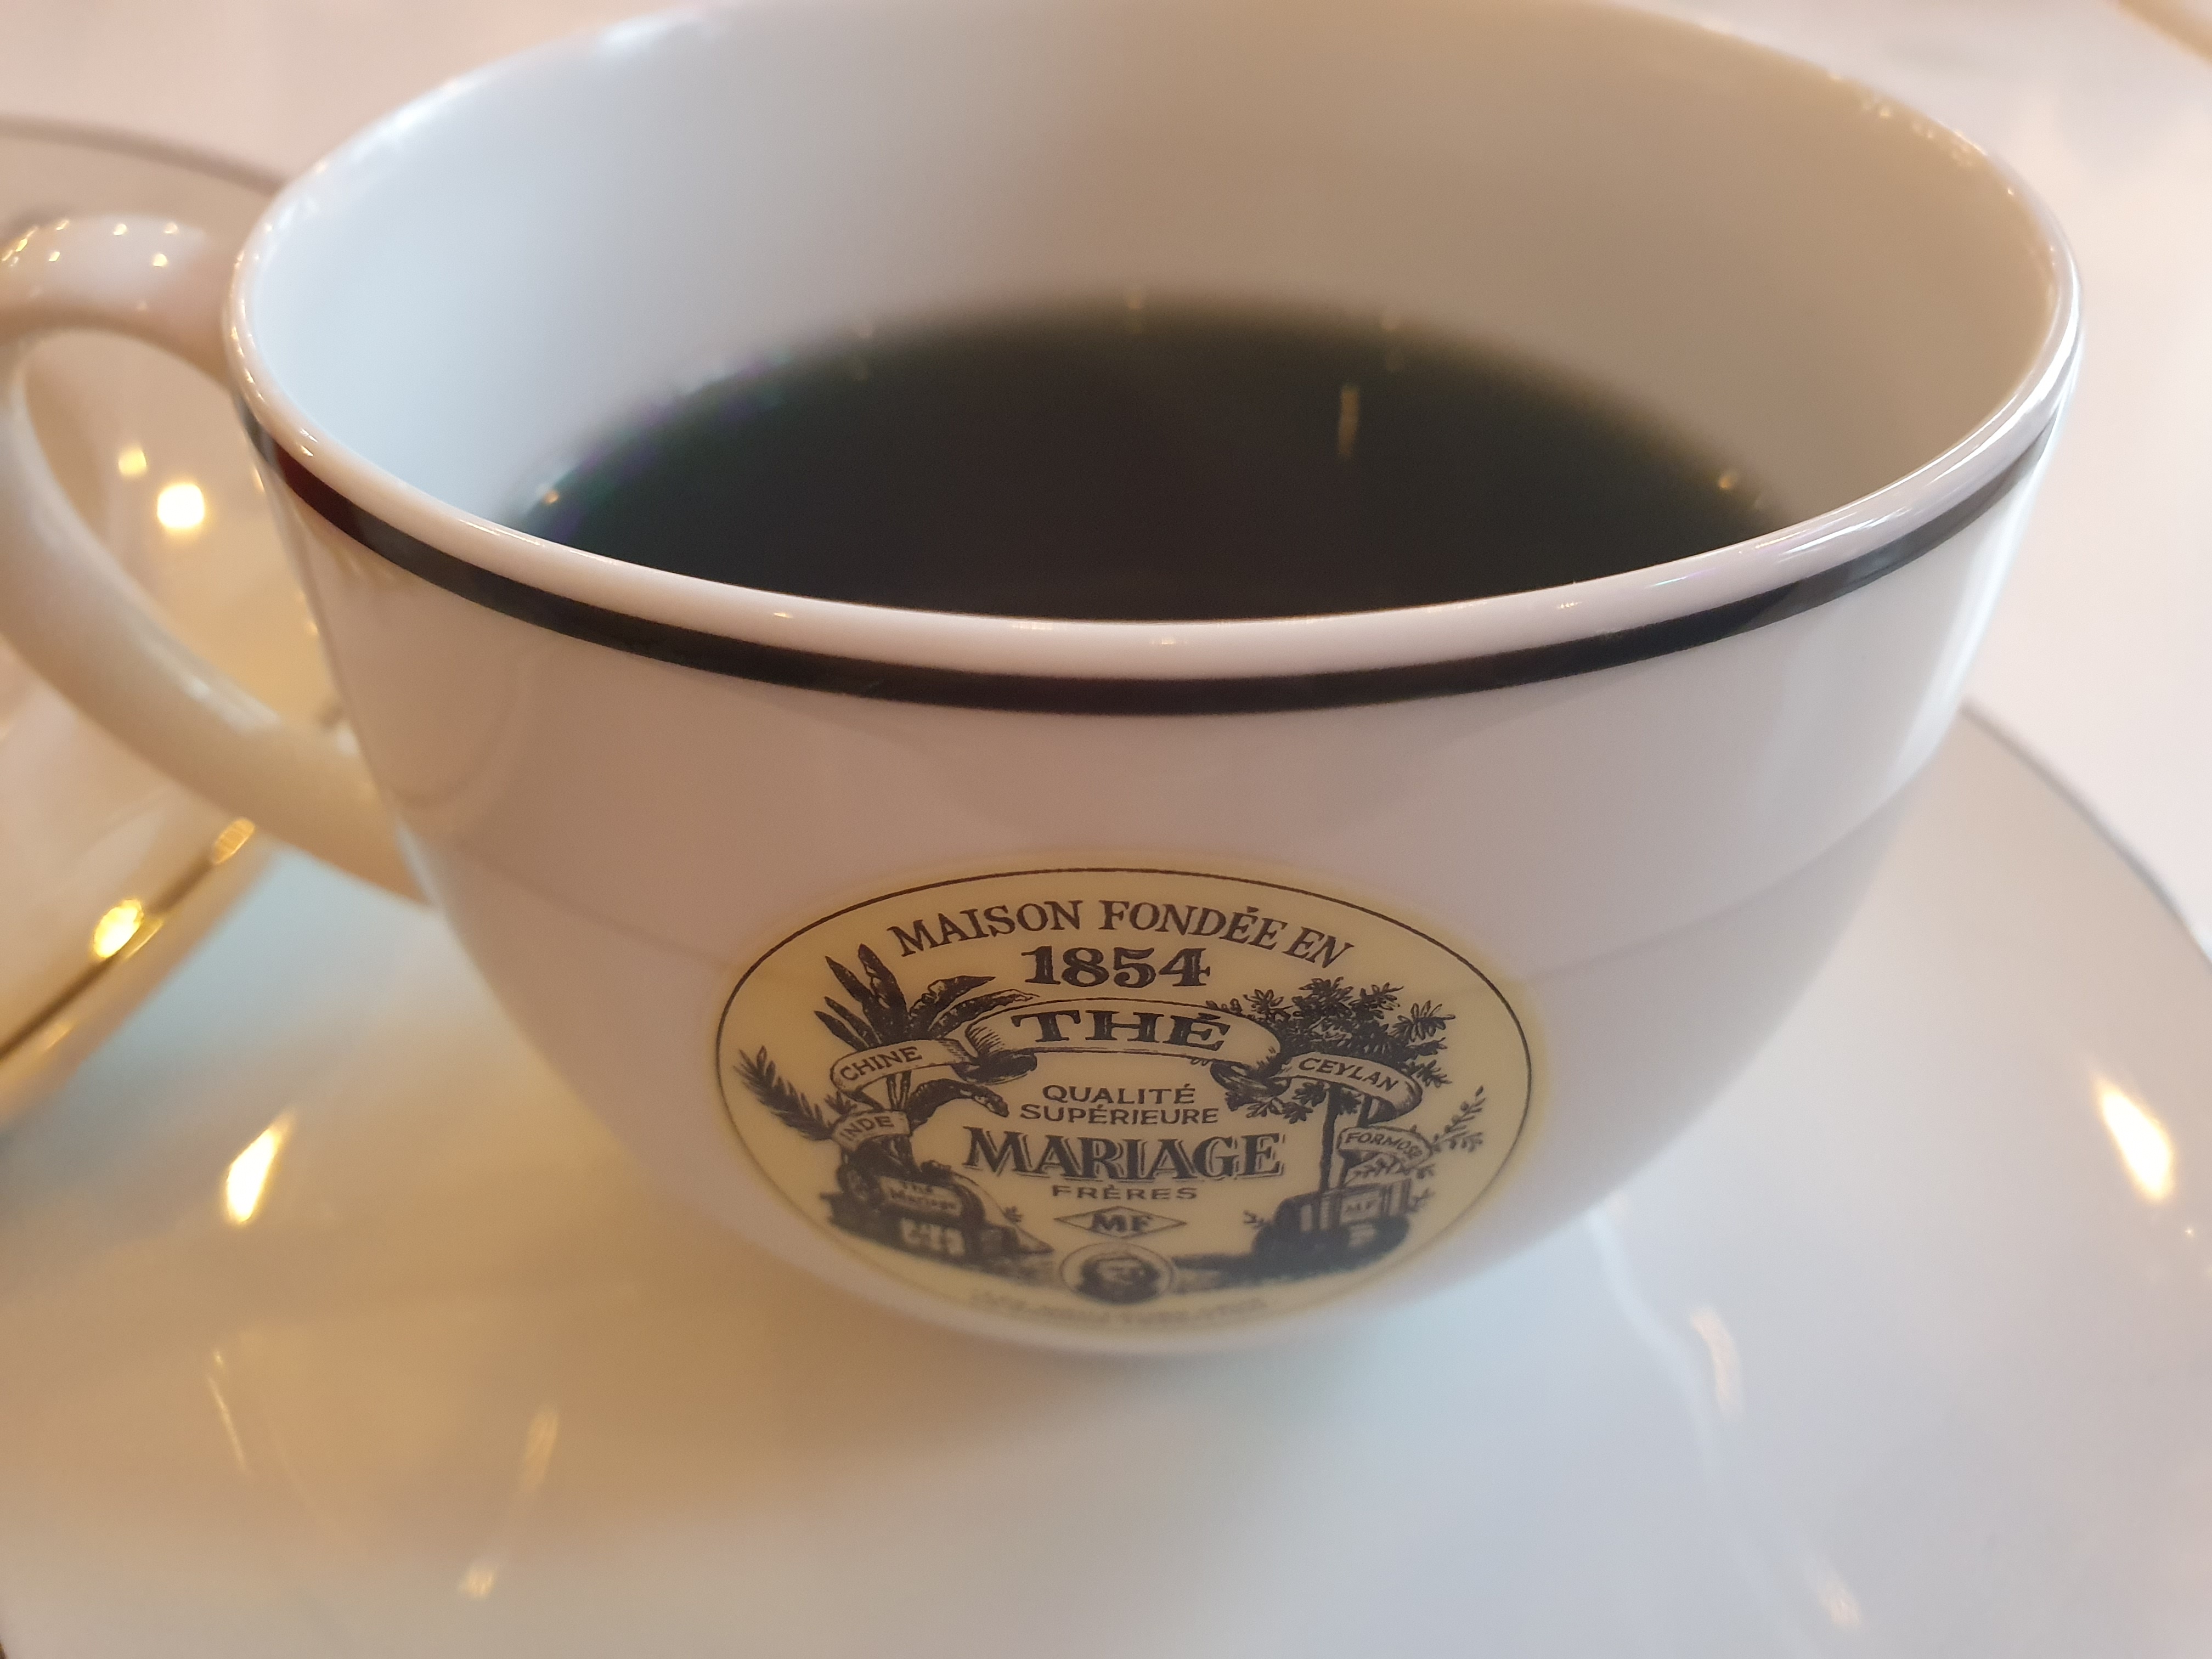 Mariage Frères tea tasting - Agent luxe blog